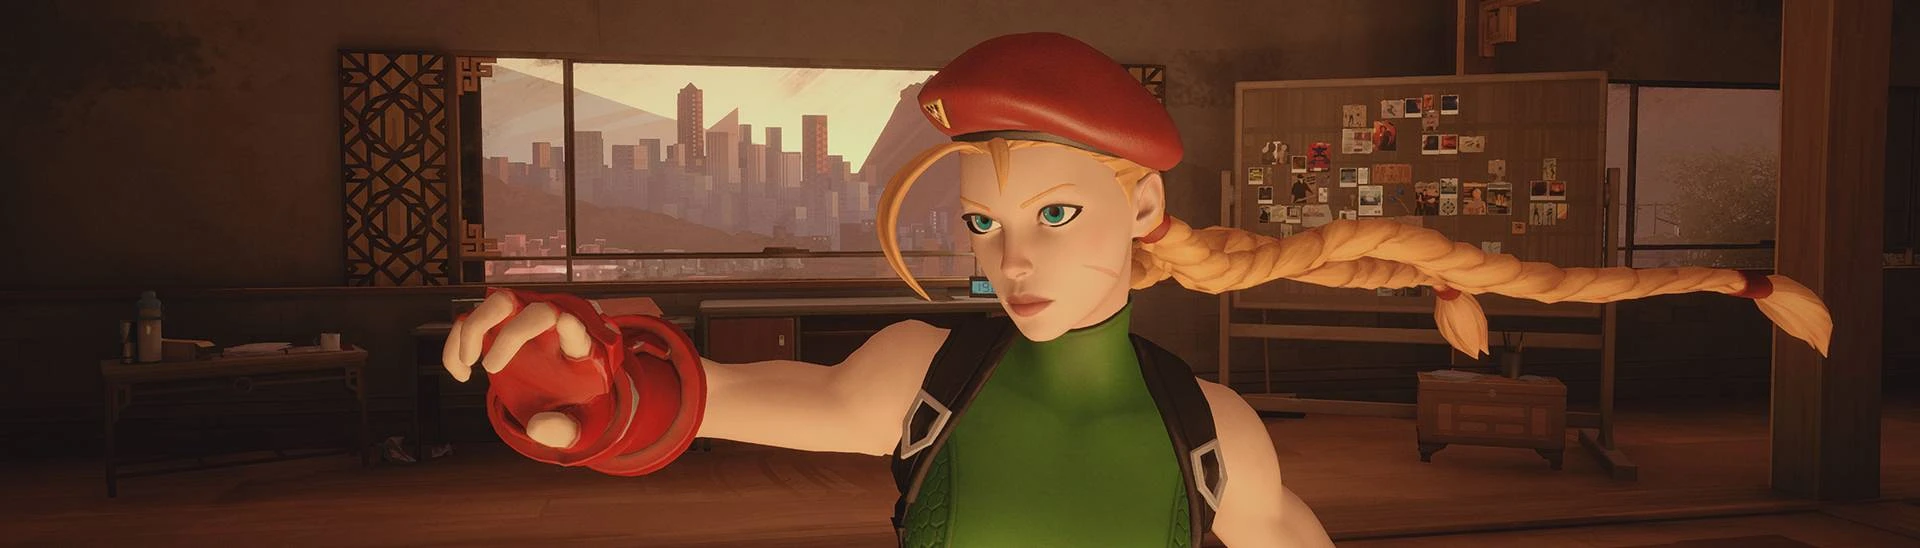 ✨NandKAnimations✨ on X: #Fortnite #FortniteArt #Blender3d Cammy White  confronts herself, lol I made this once I found out that Cammy had made it  into Fortnite. And Yes. My model did have pants